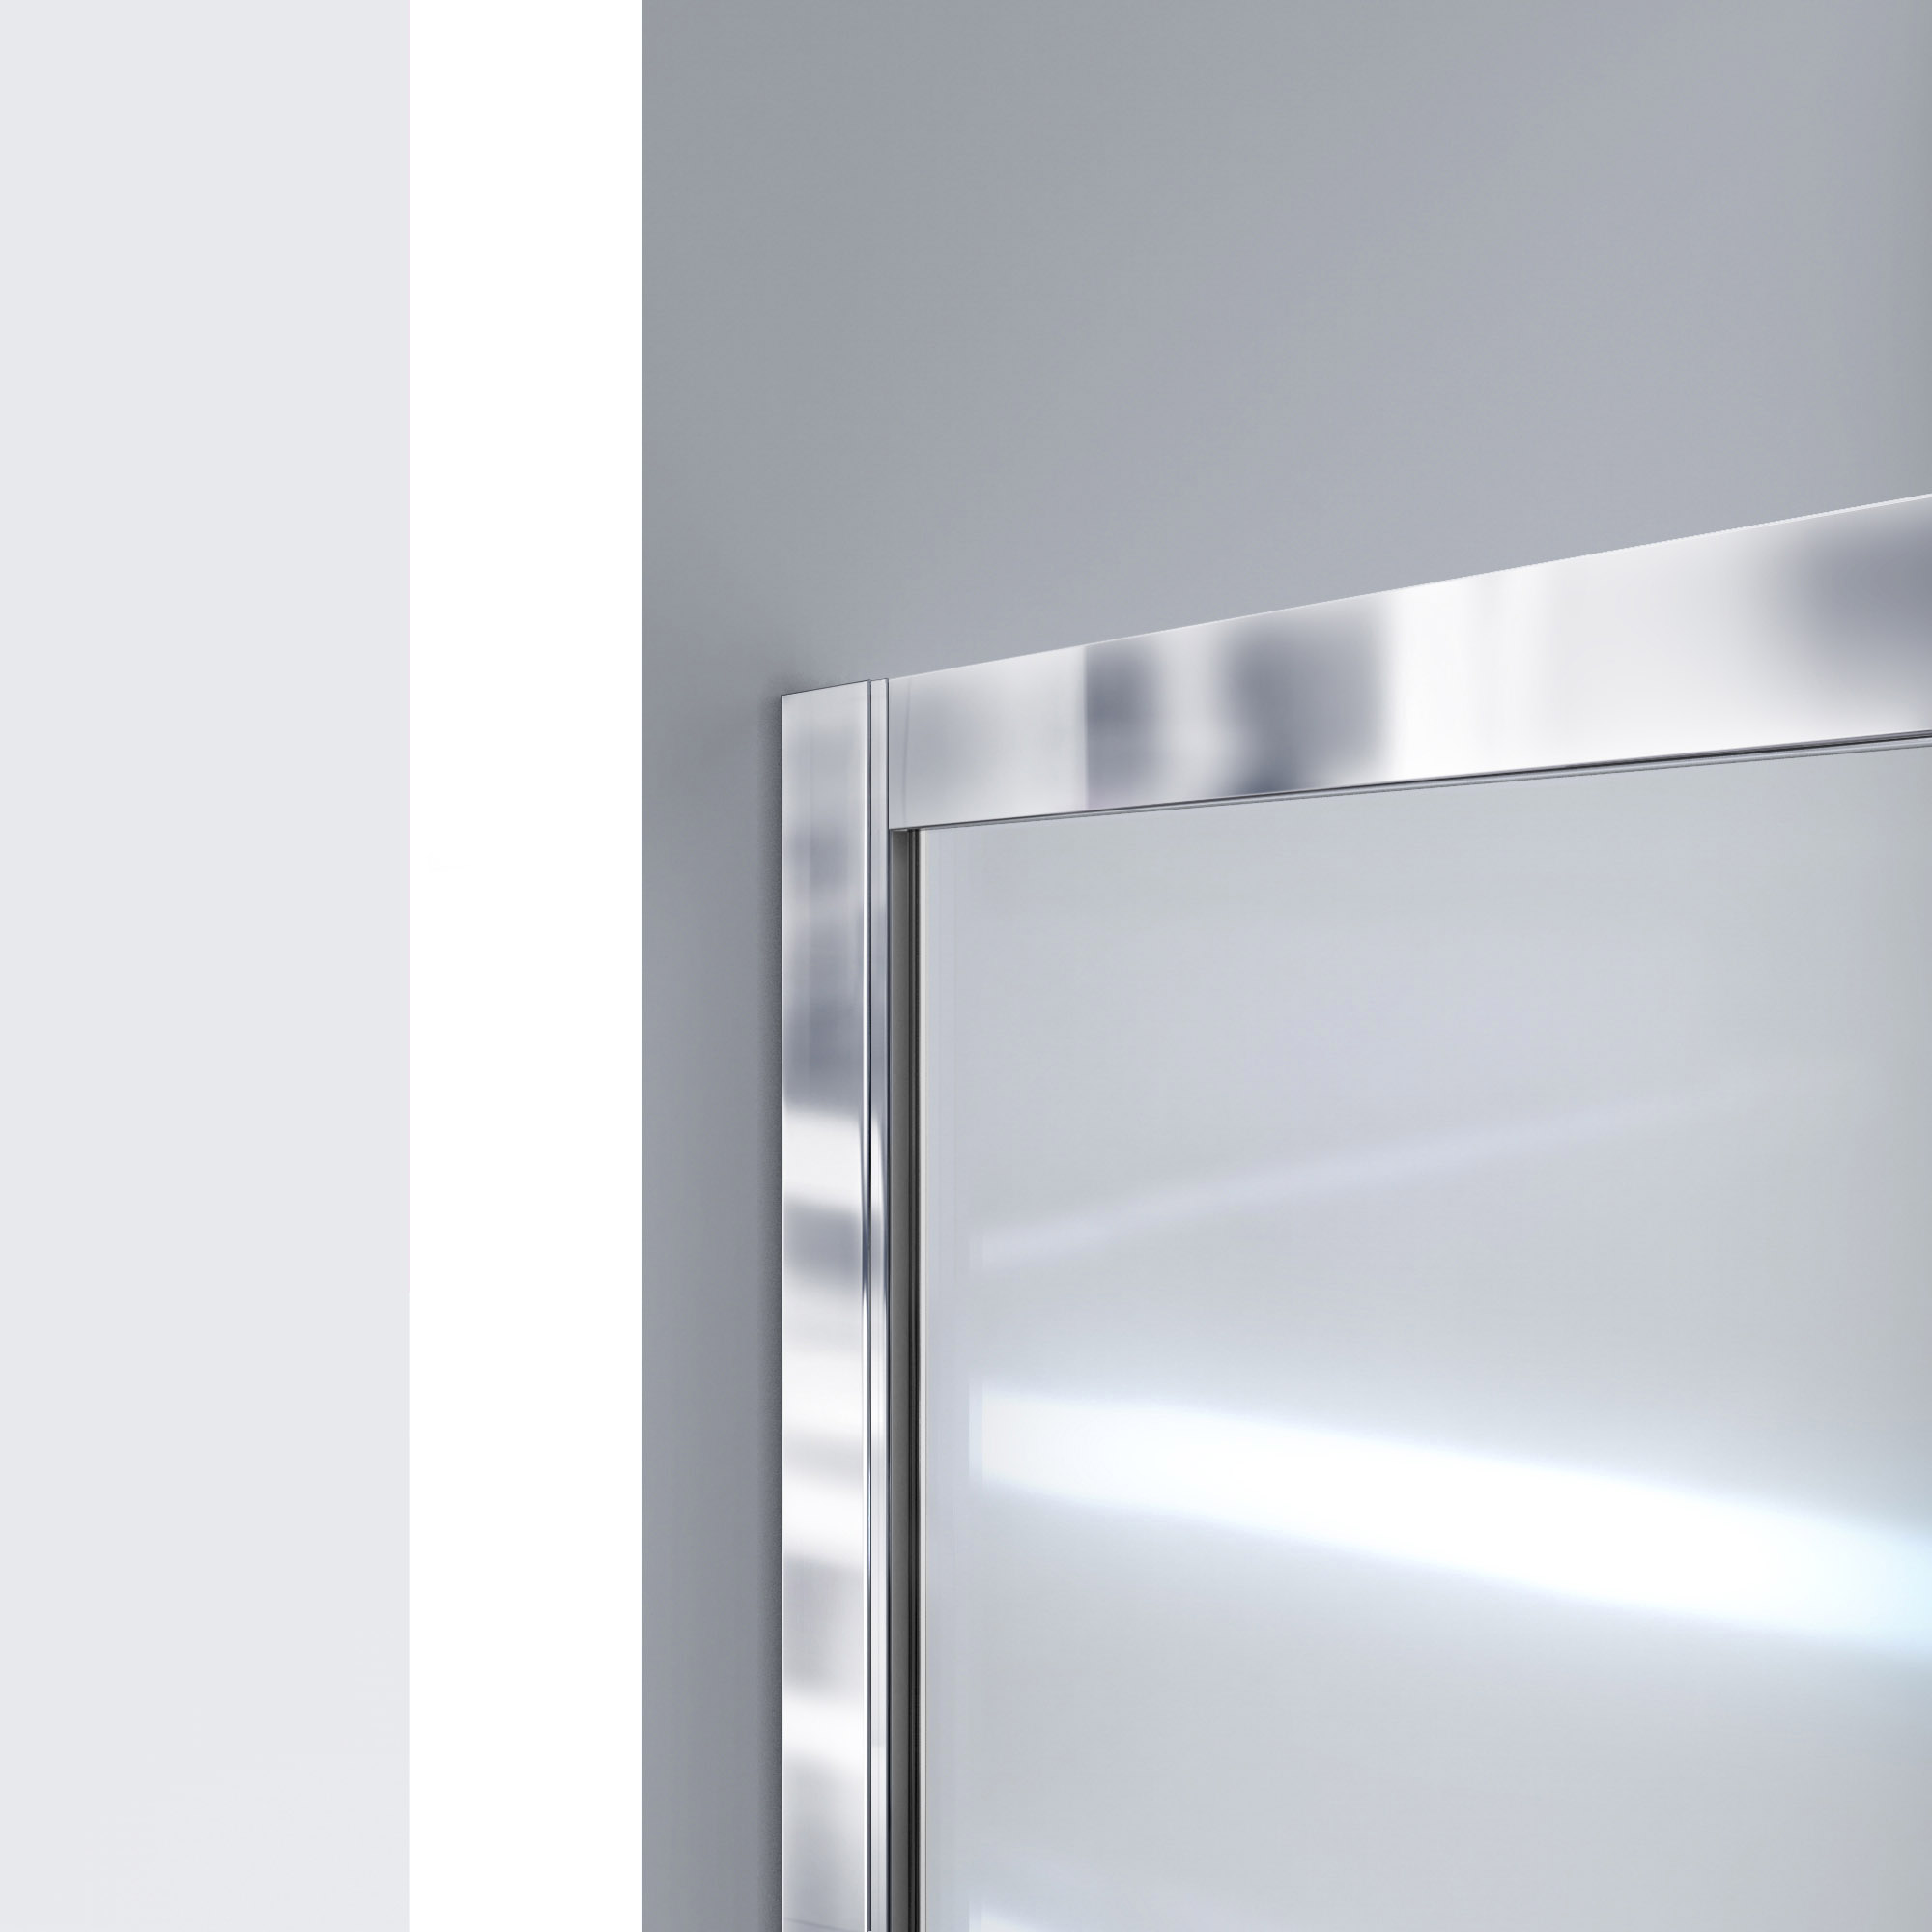 DreamLine Infinity-Z 56-60 in. W x 60 in. H Clear Sliding Tub Door in Brushed Nickel with White Acrylic Backwall Kit - image 6 of 14